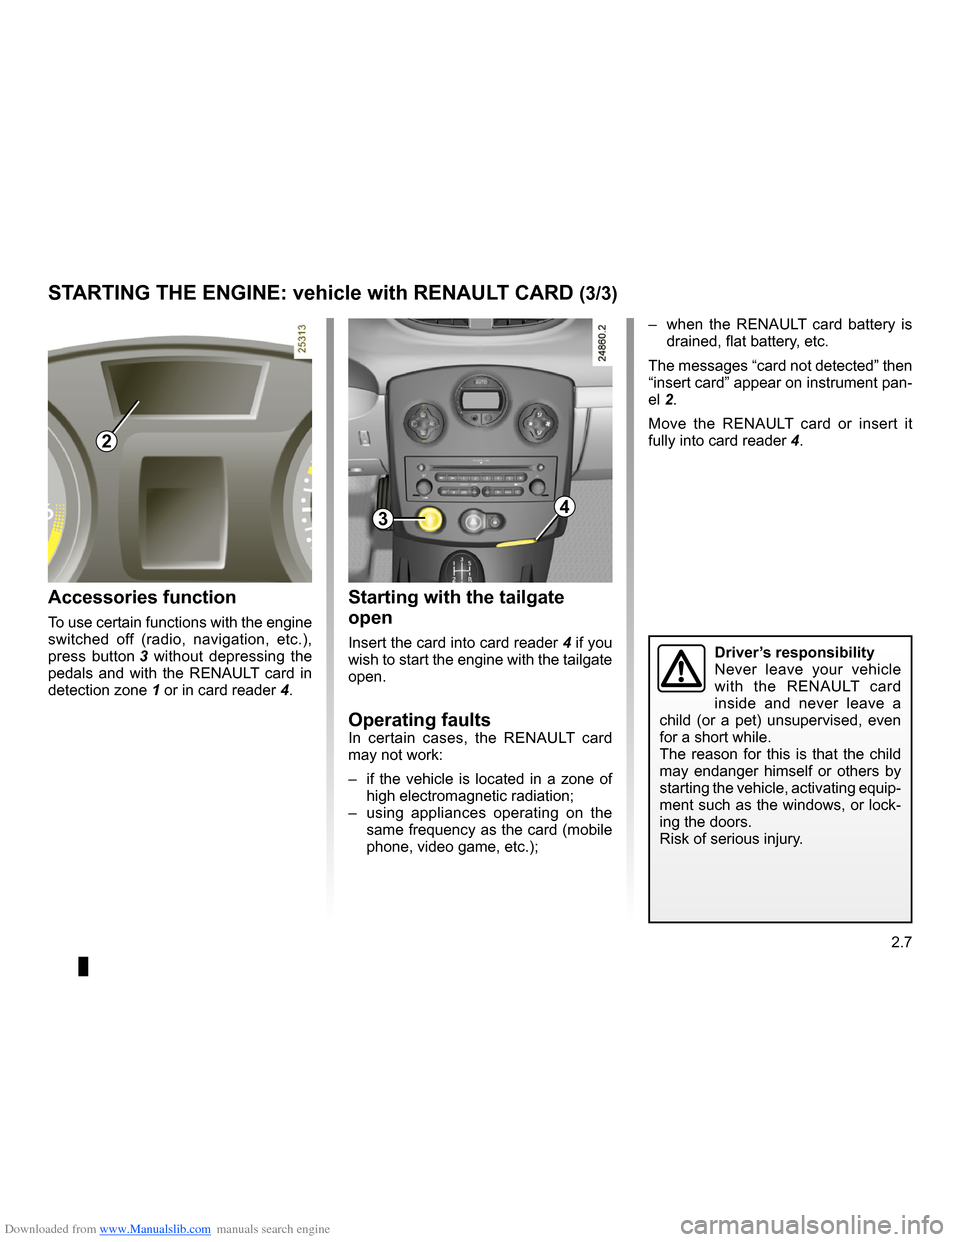 RENAULT CLIO 2009 X85 / 3.G User Guide Downloaded from www.Manualslib.com manuals search engine 
switching on the vehicle ignition ............................(current page)
JauneNoirNoir texte
2.7
ENG_UD10551_1Démarrage moteur : véhicul